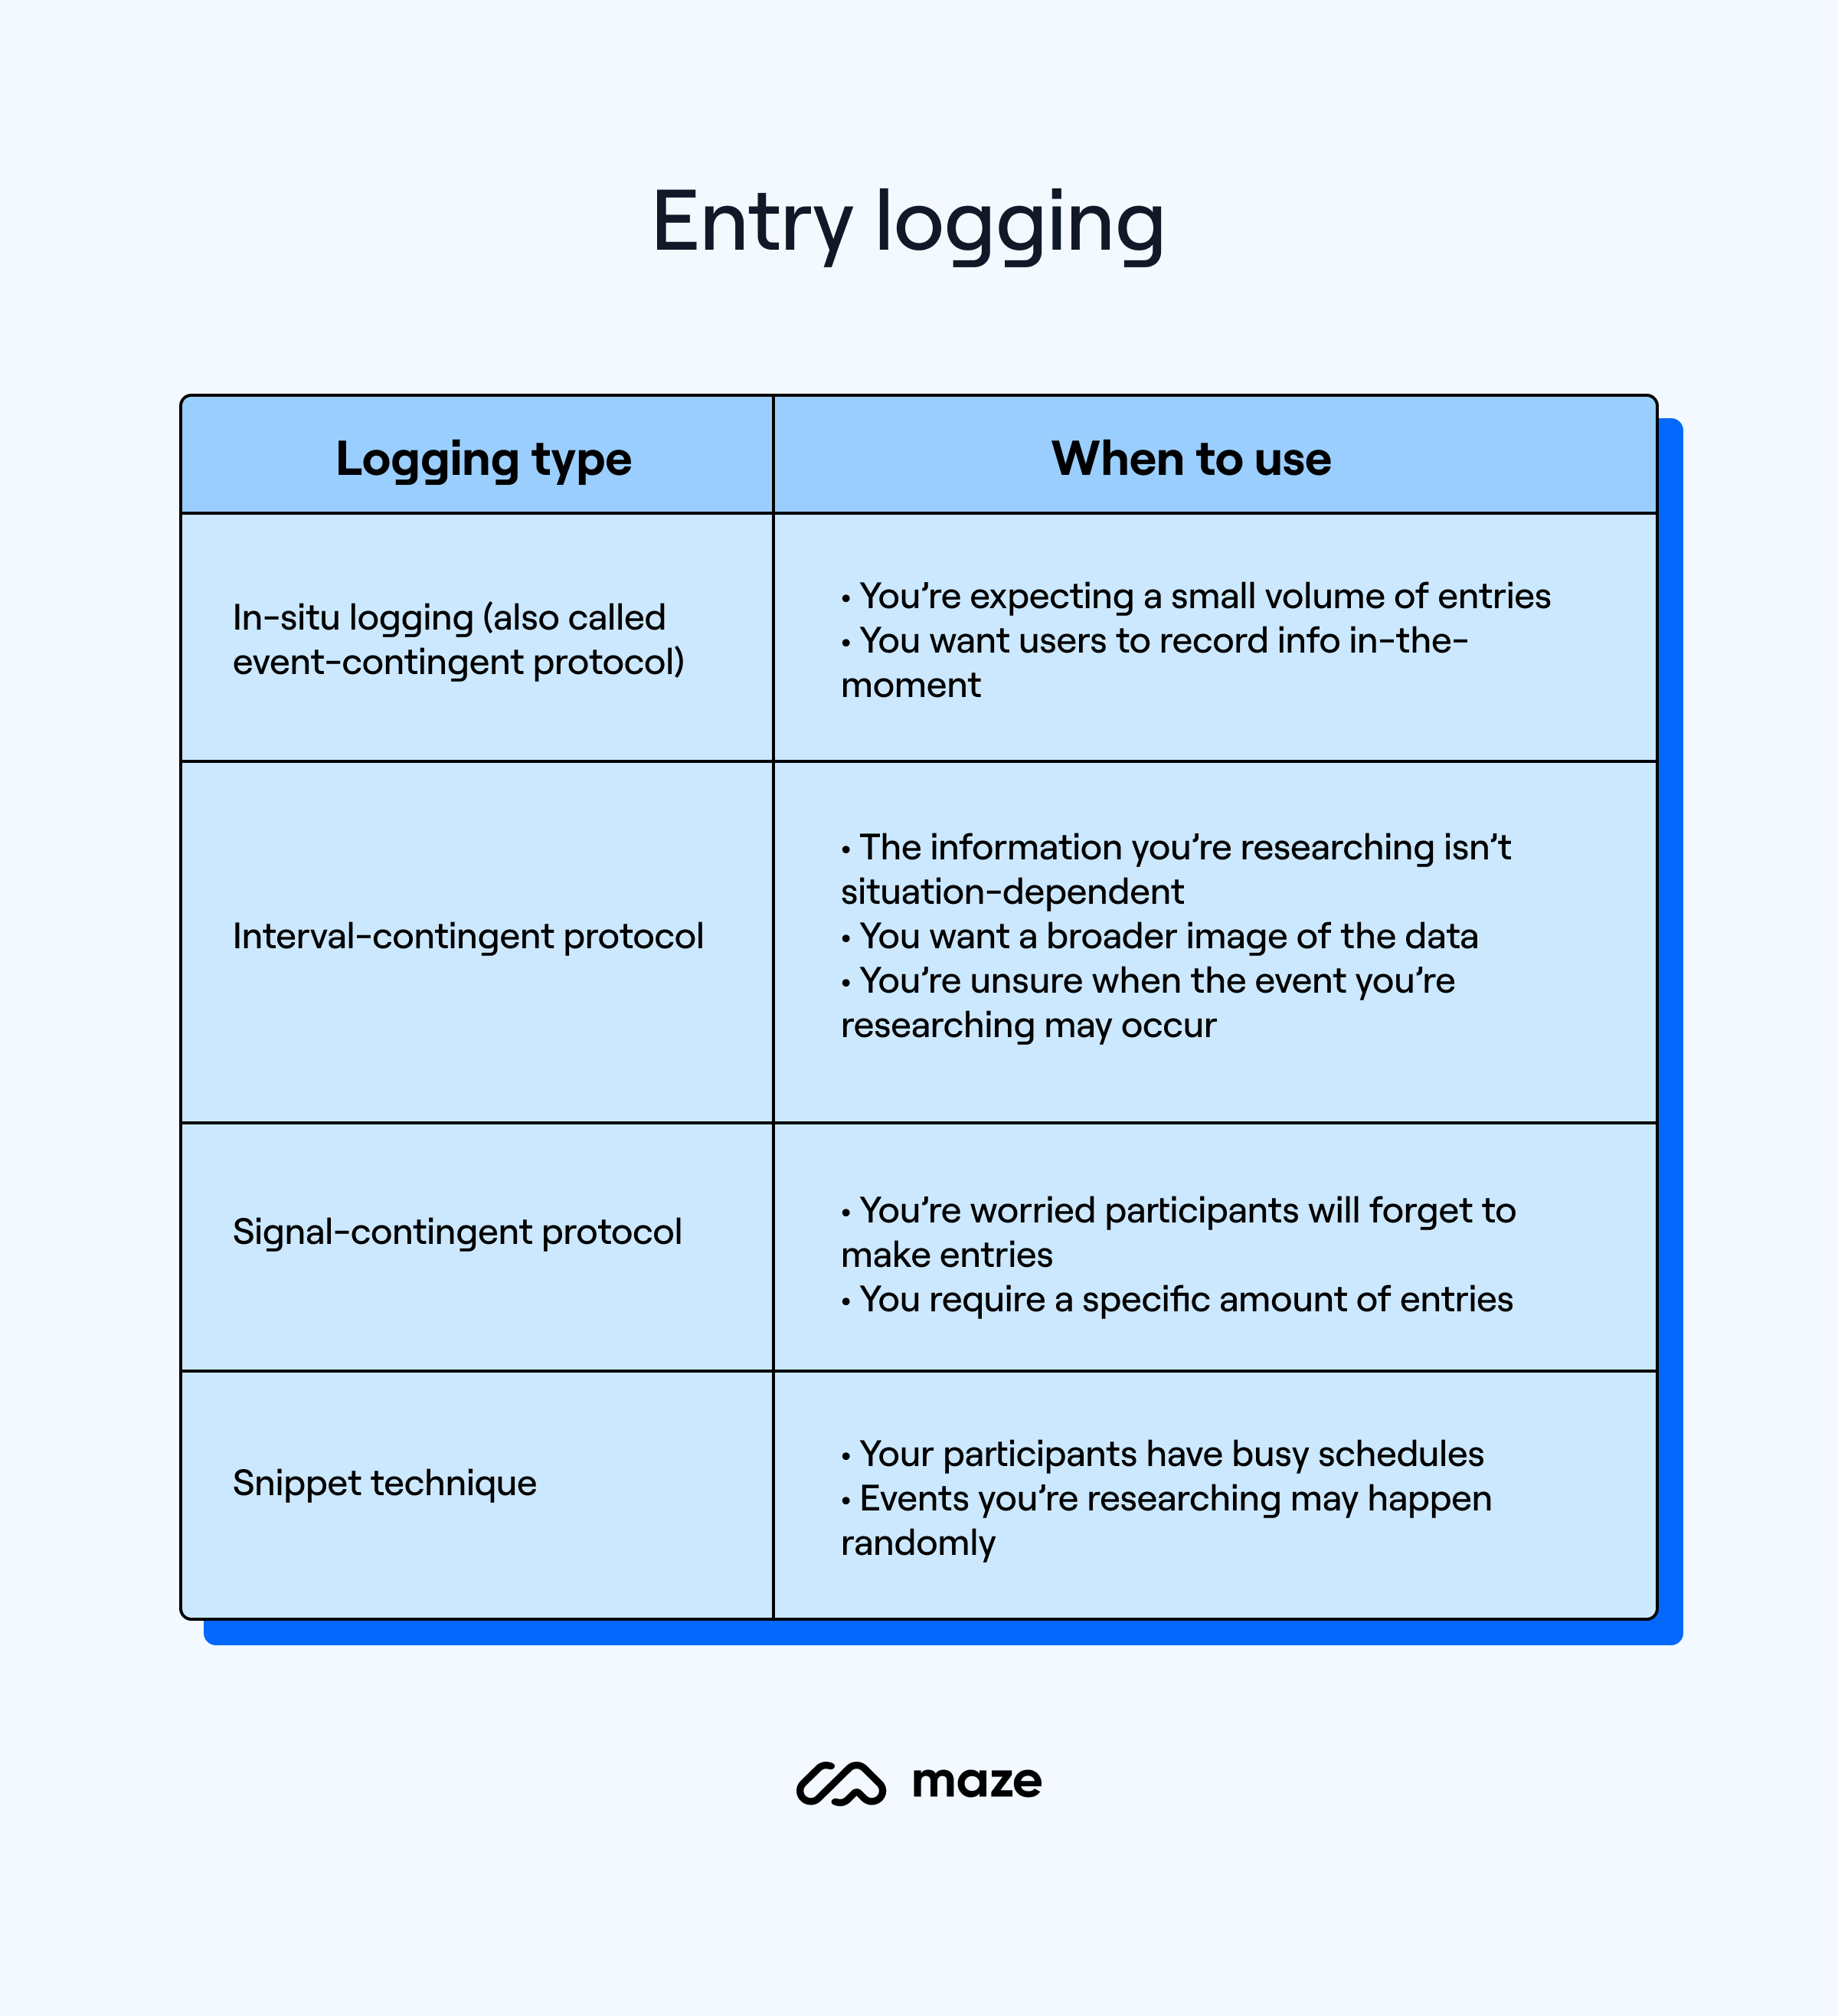 Chart showing the four main types of entry logging for diary research